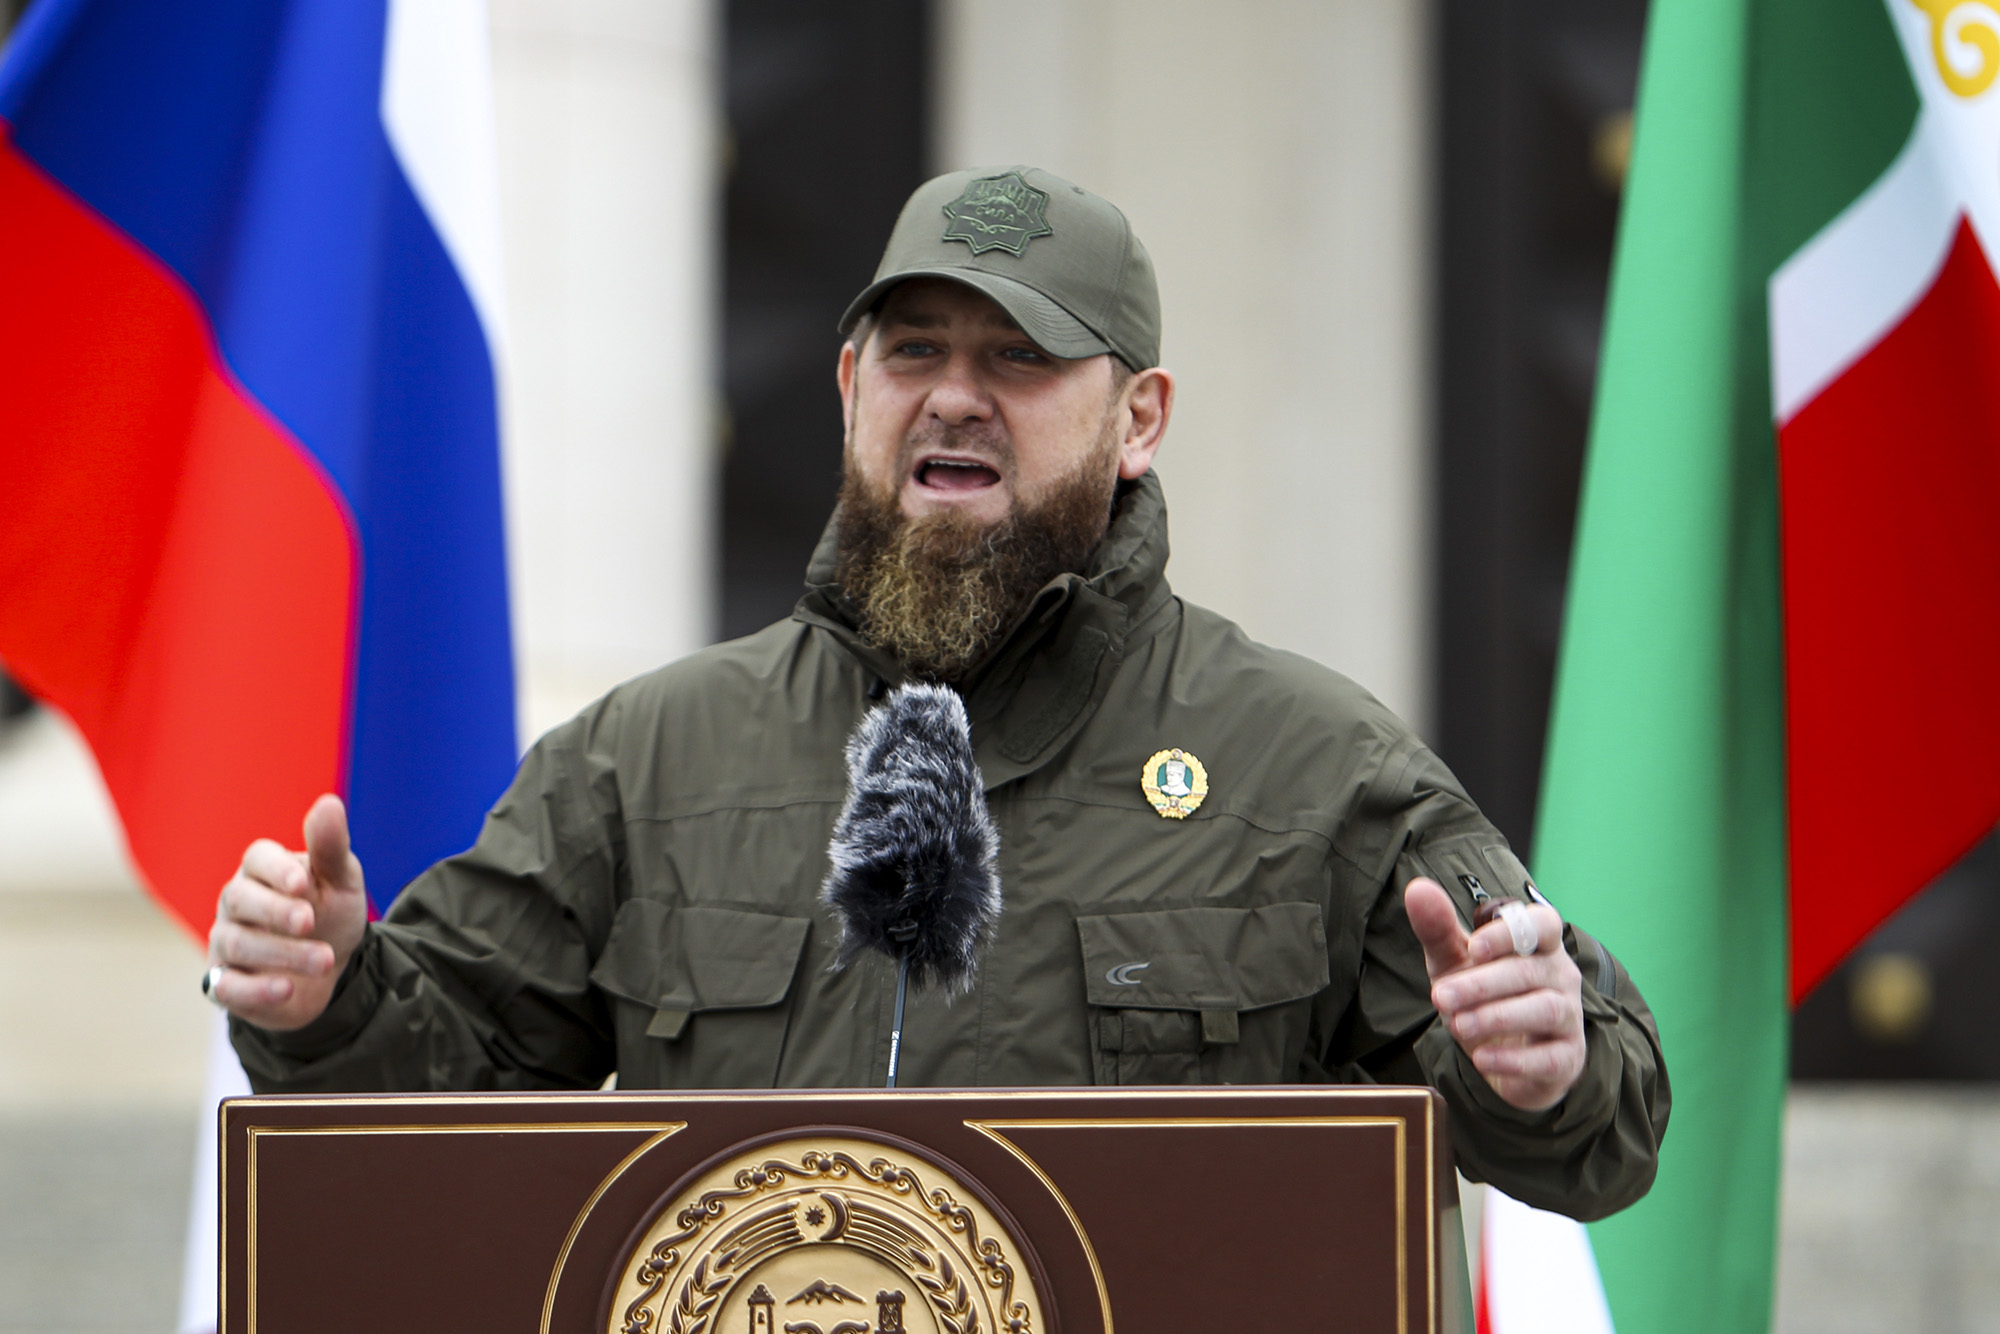 Chechnya's regional leader Ramzan Kadyrov addresses servicemen attending a review of the Chechen Republic's troops and military hardware in Grozny, Chechen Republic, on February 25, 2022.